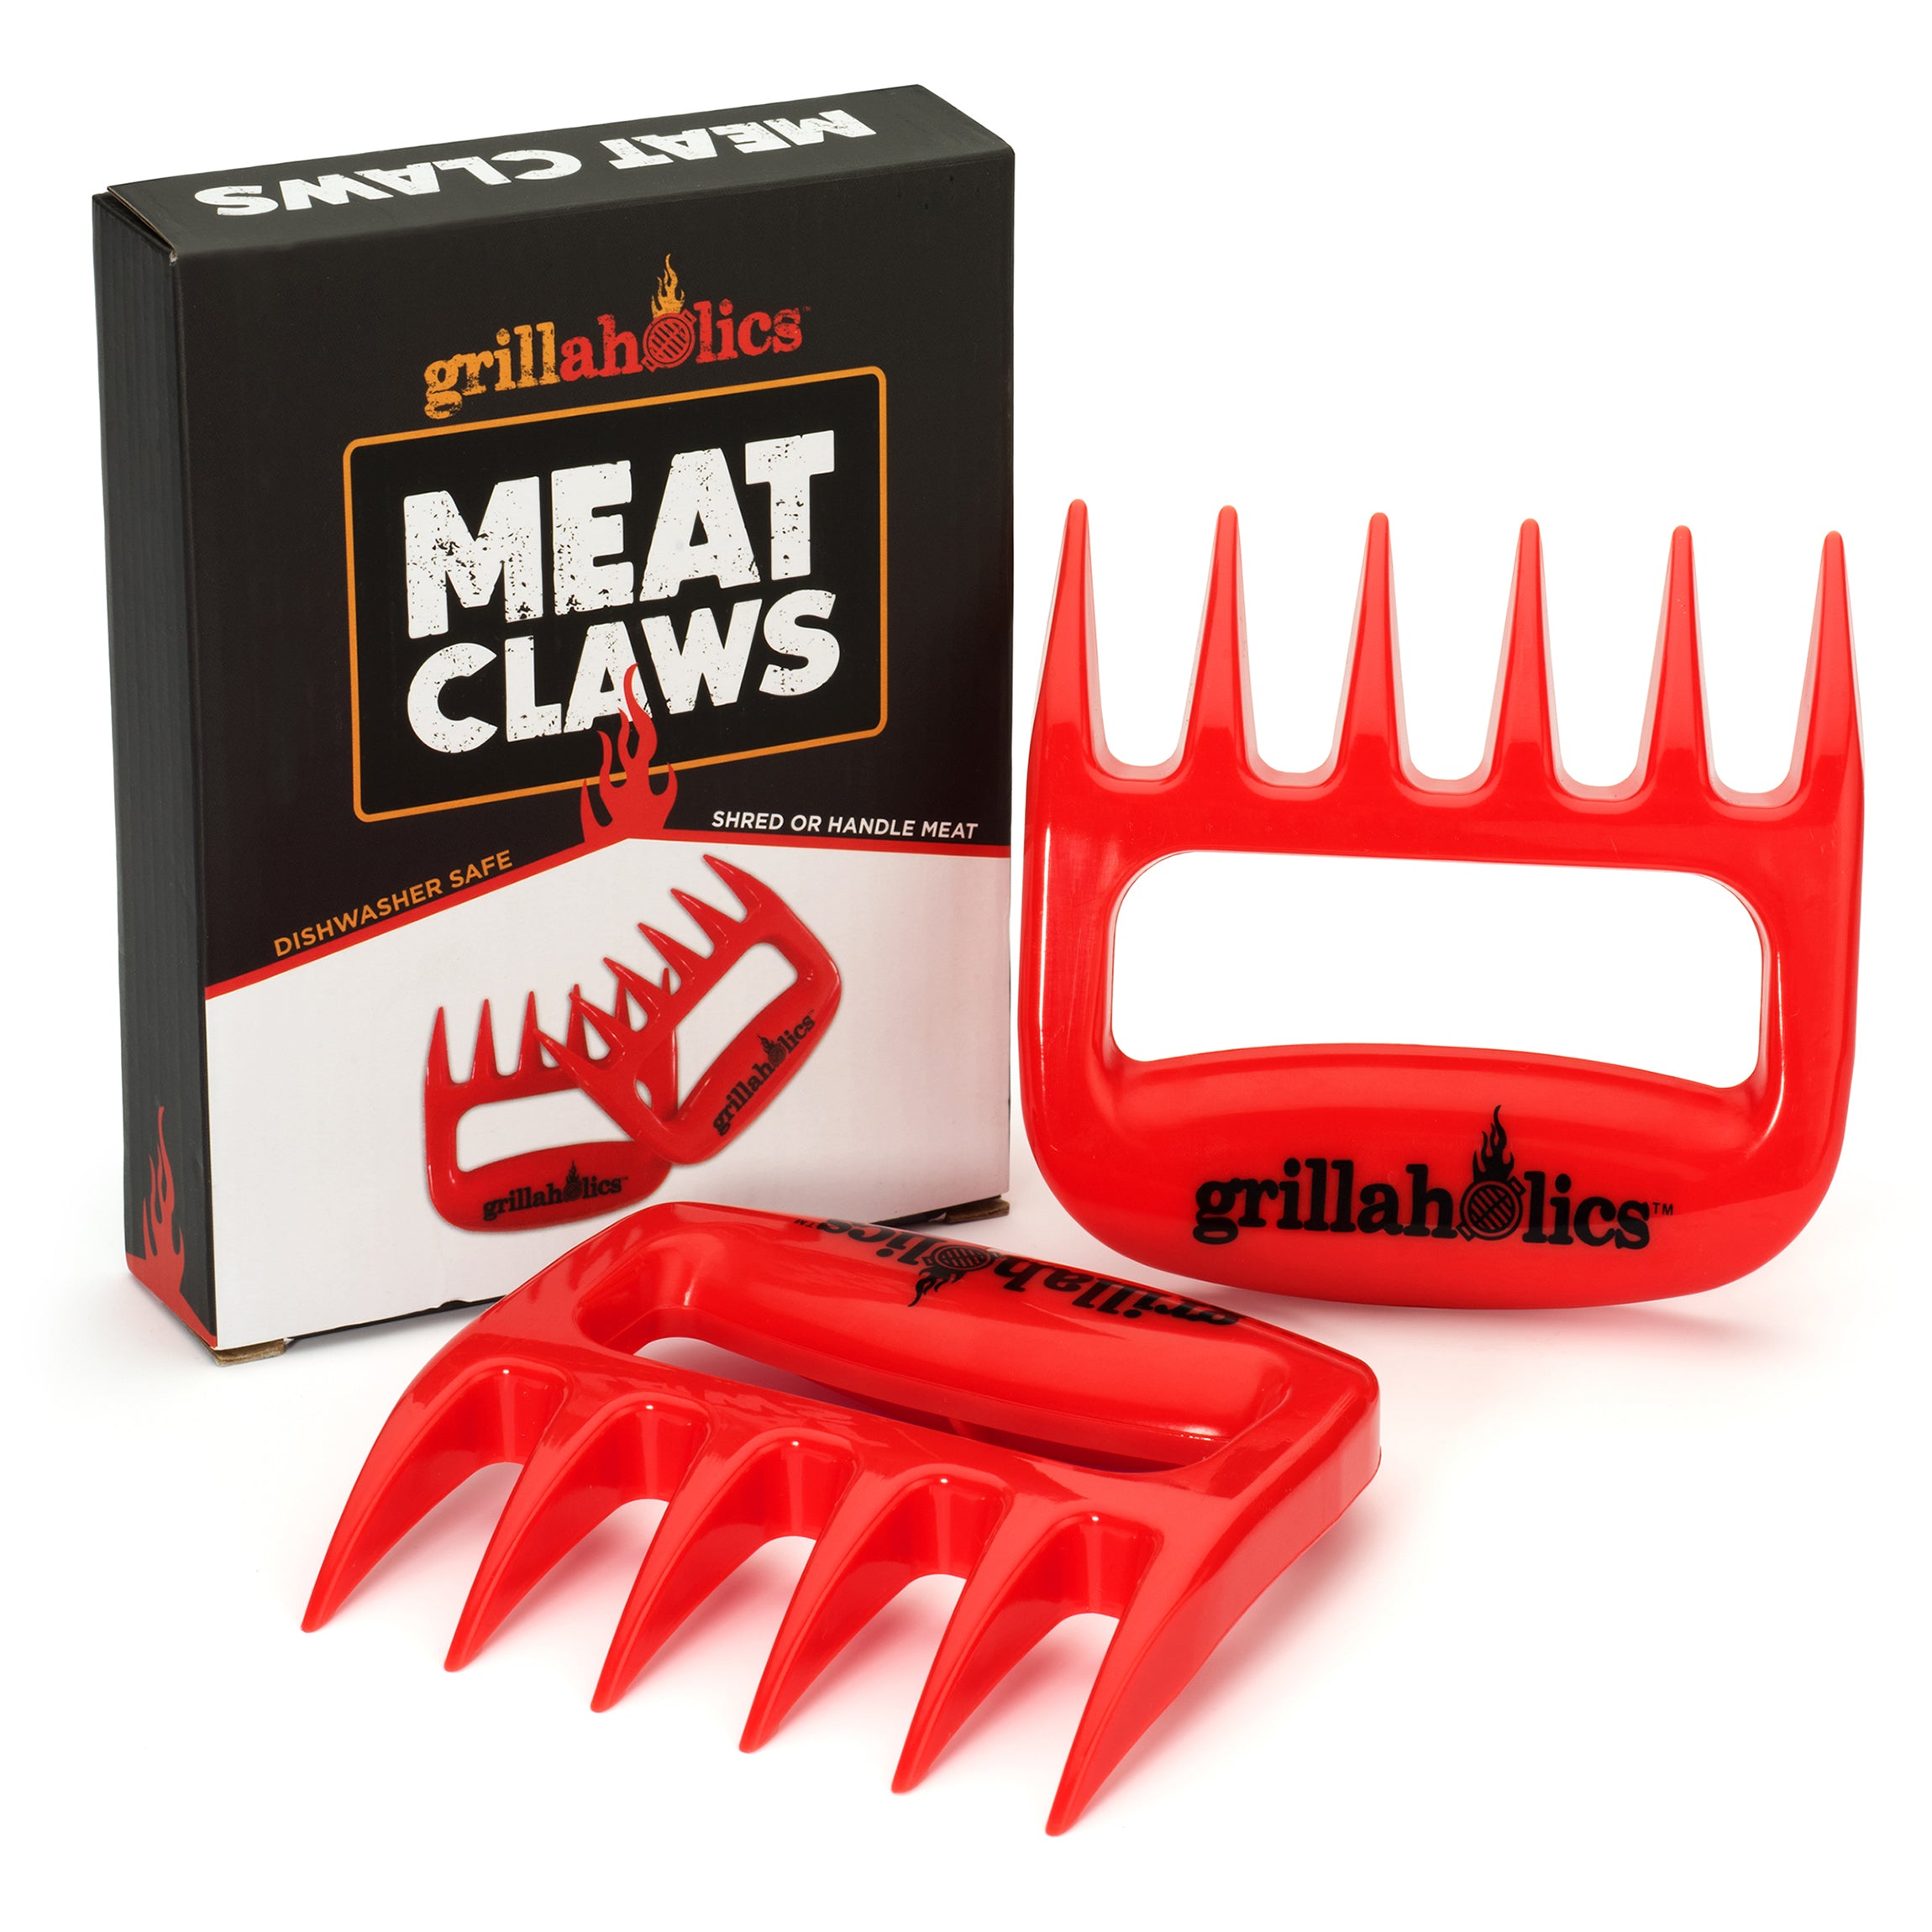 JEANTRIX Meat Claws,Meat Shredder Claws, Stainless Steel BBQ Meat Claws for  Shredding Meat with Wood Heat Resistant Handle (Gules)